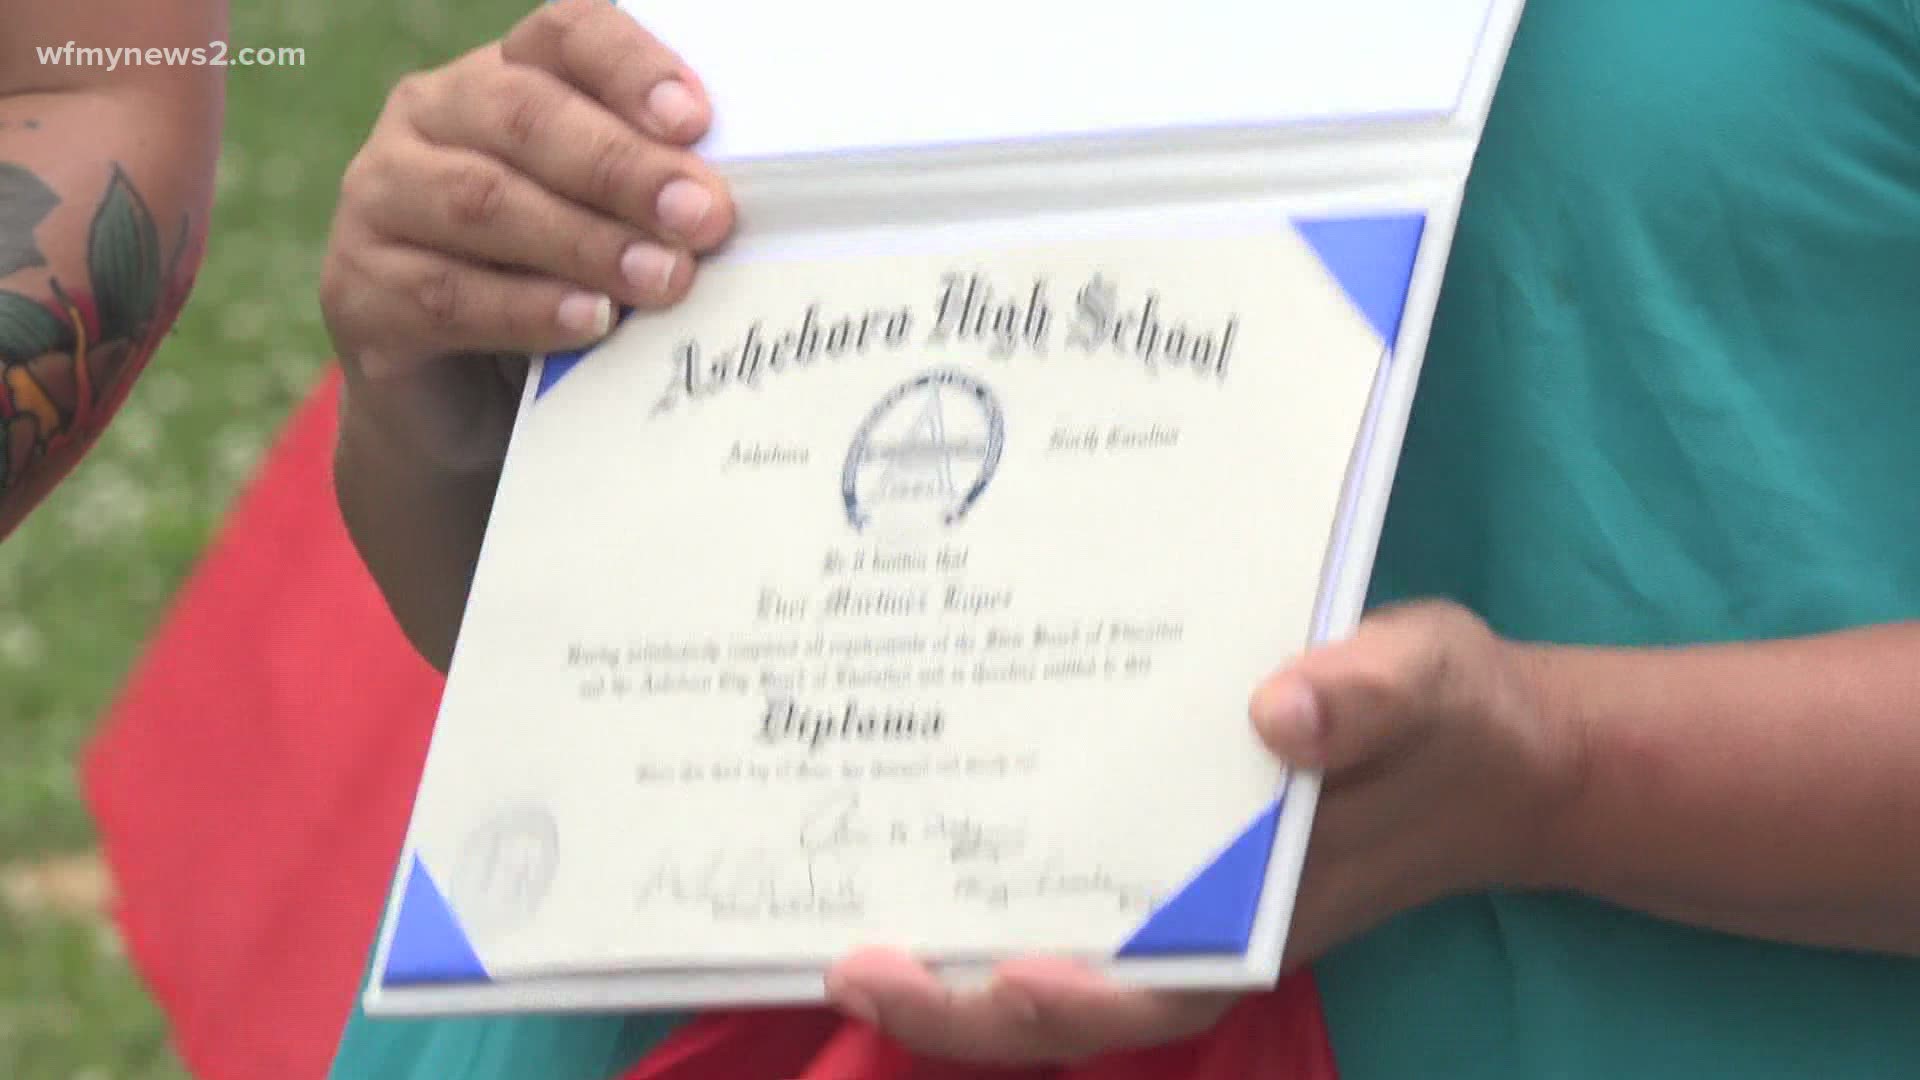 Ever Lopez got his diploma days after he says the school refused to give it to him. Asheboro City Schools said he violated the dress code at graduation.